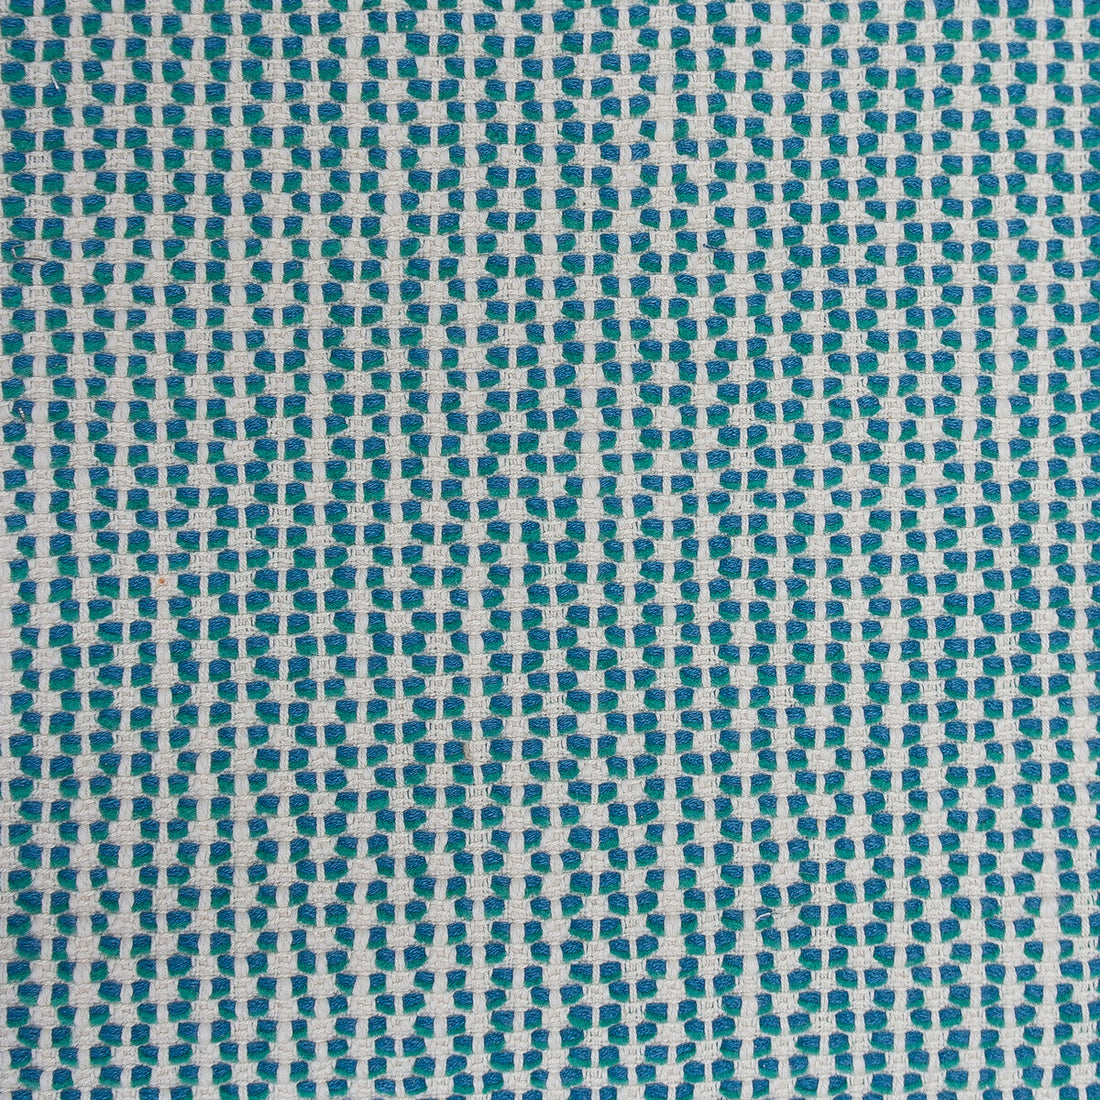 Palenque fabric in verde color - pattern GDT5595.001.0 - by Gaston y Daniela in the Gaston Nuevo Mundo collection